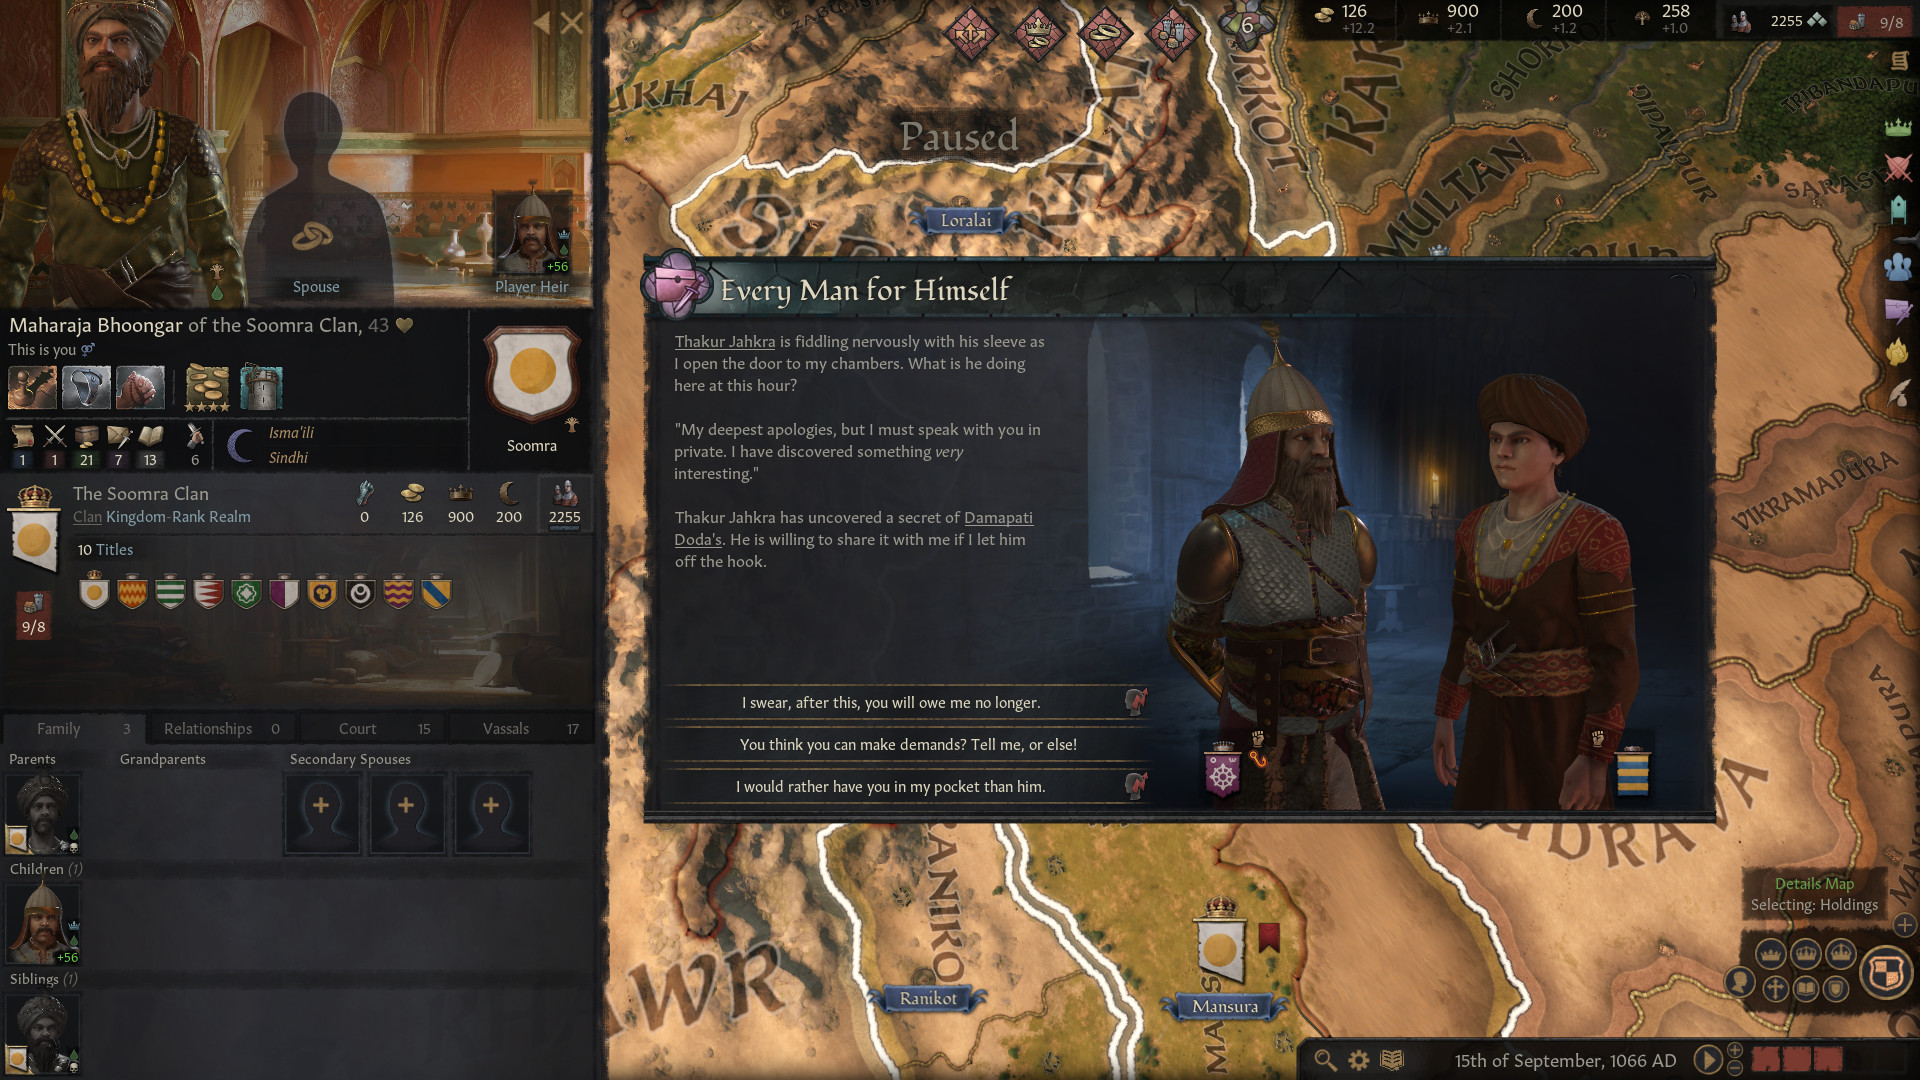 Best strategy games: Crusader Kings 3. Image shows two characters interacting under the title "Every man for himself".